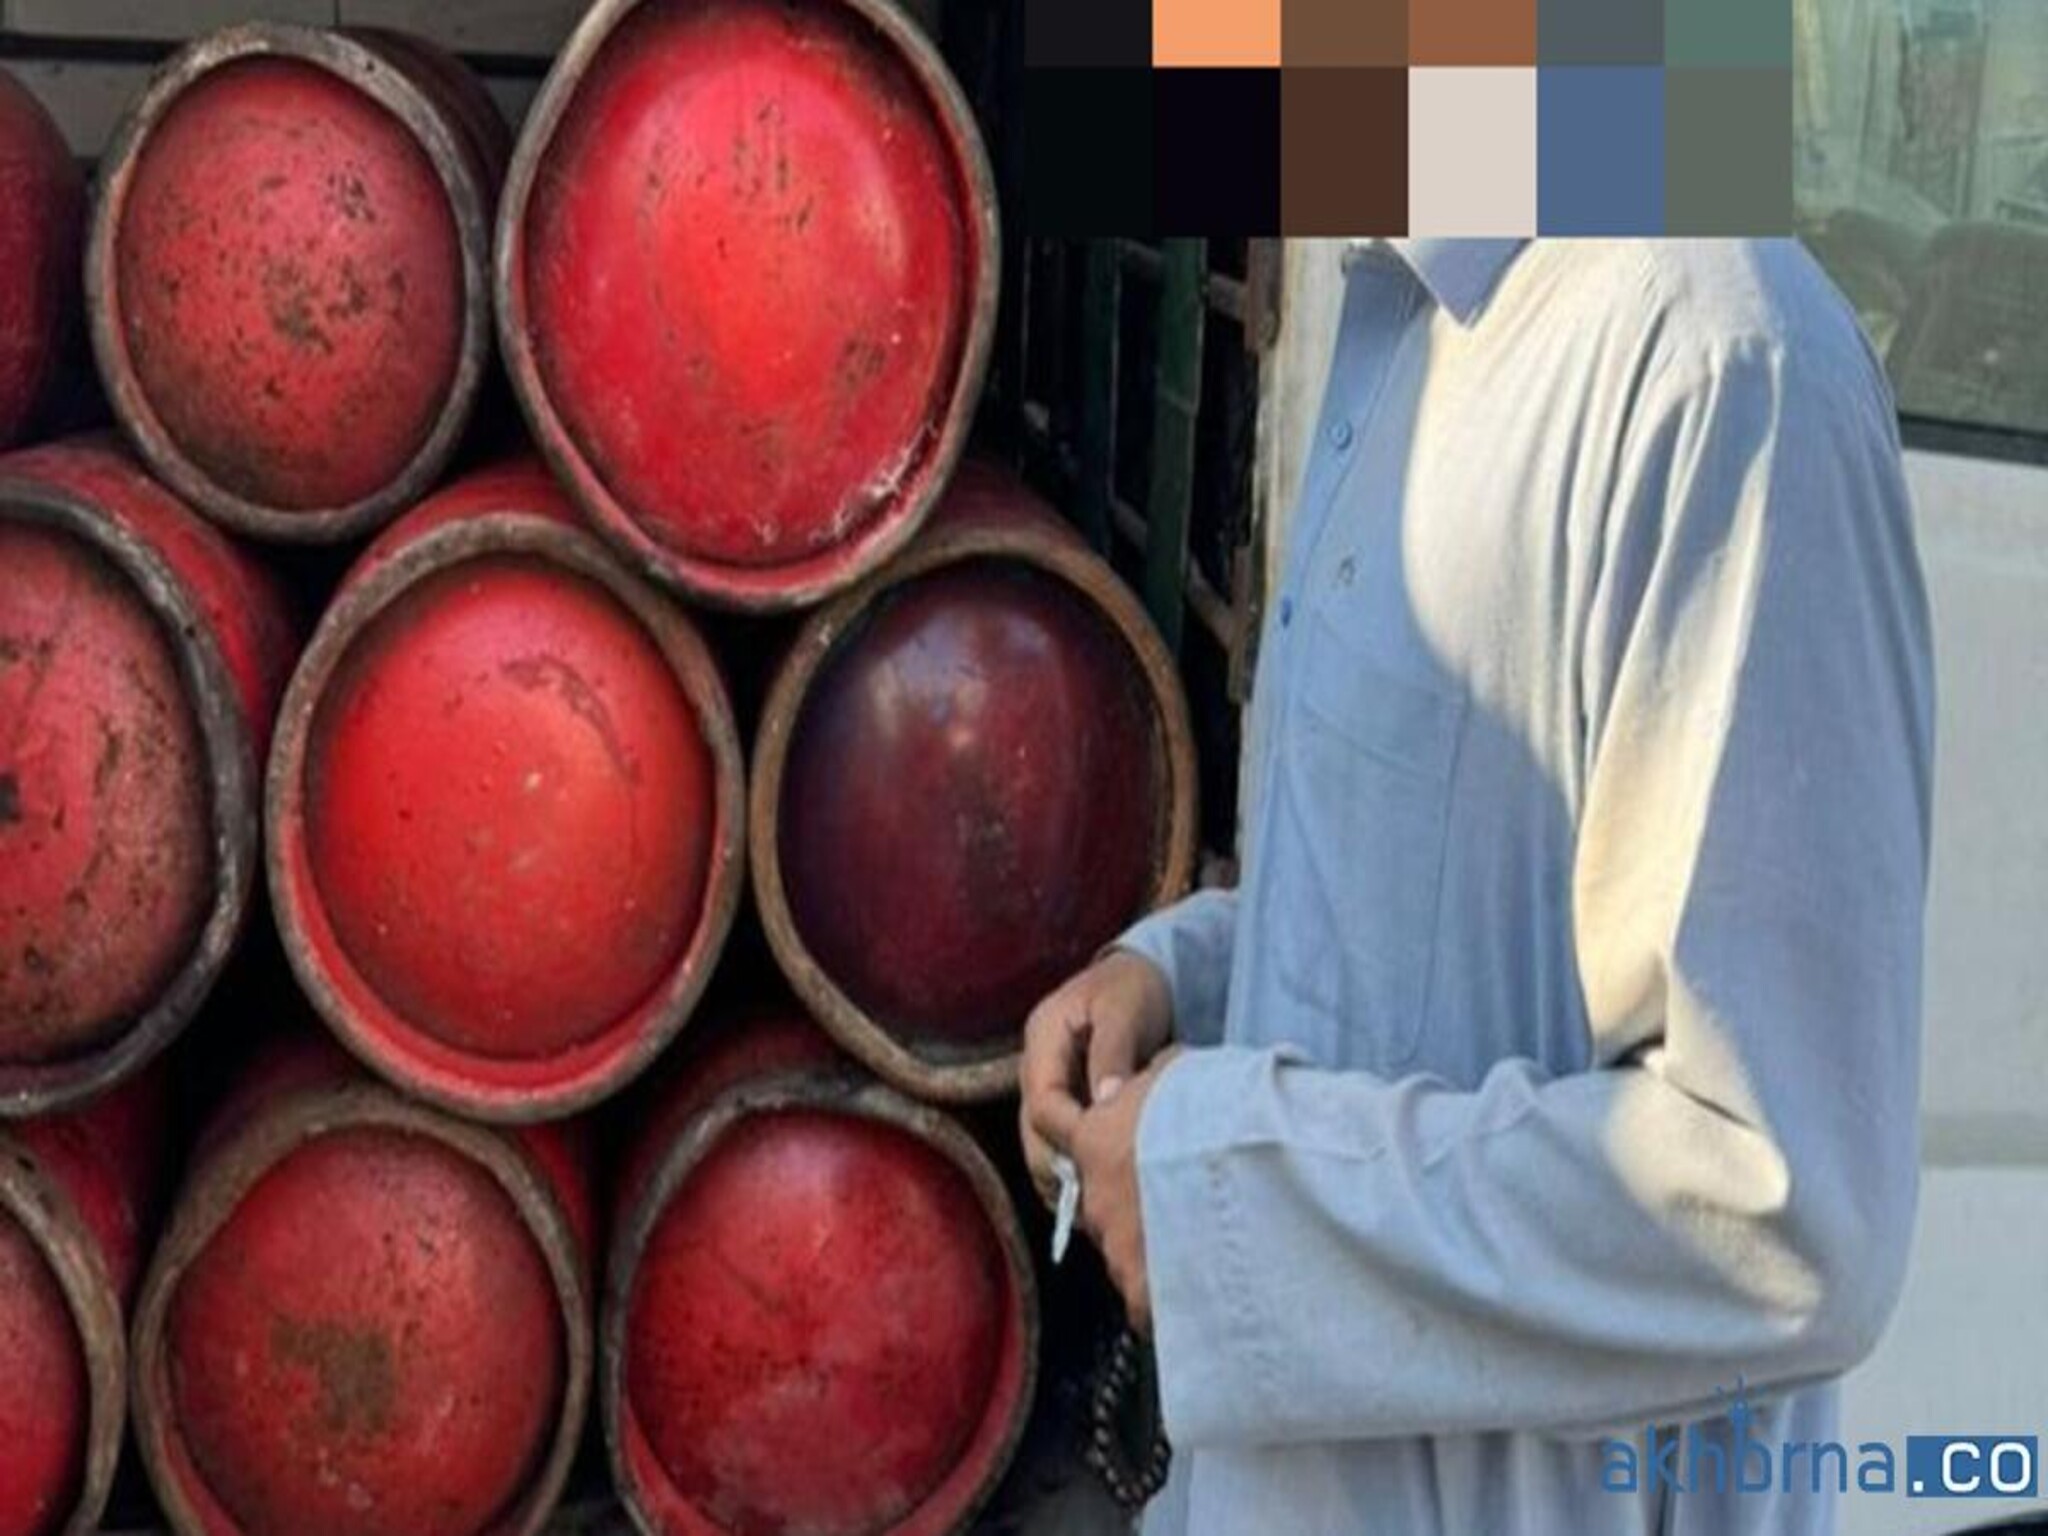 Urgent.. Dubai Police Seize Bus Laded with Unauthorized Gas Cylinders